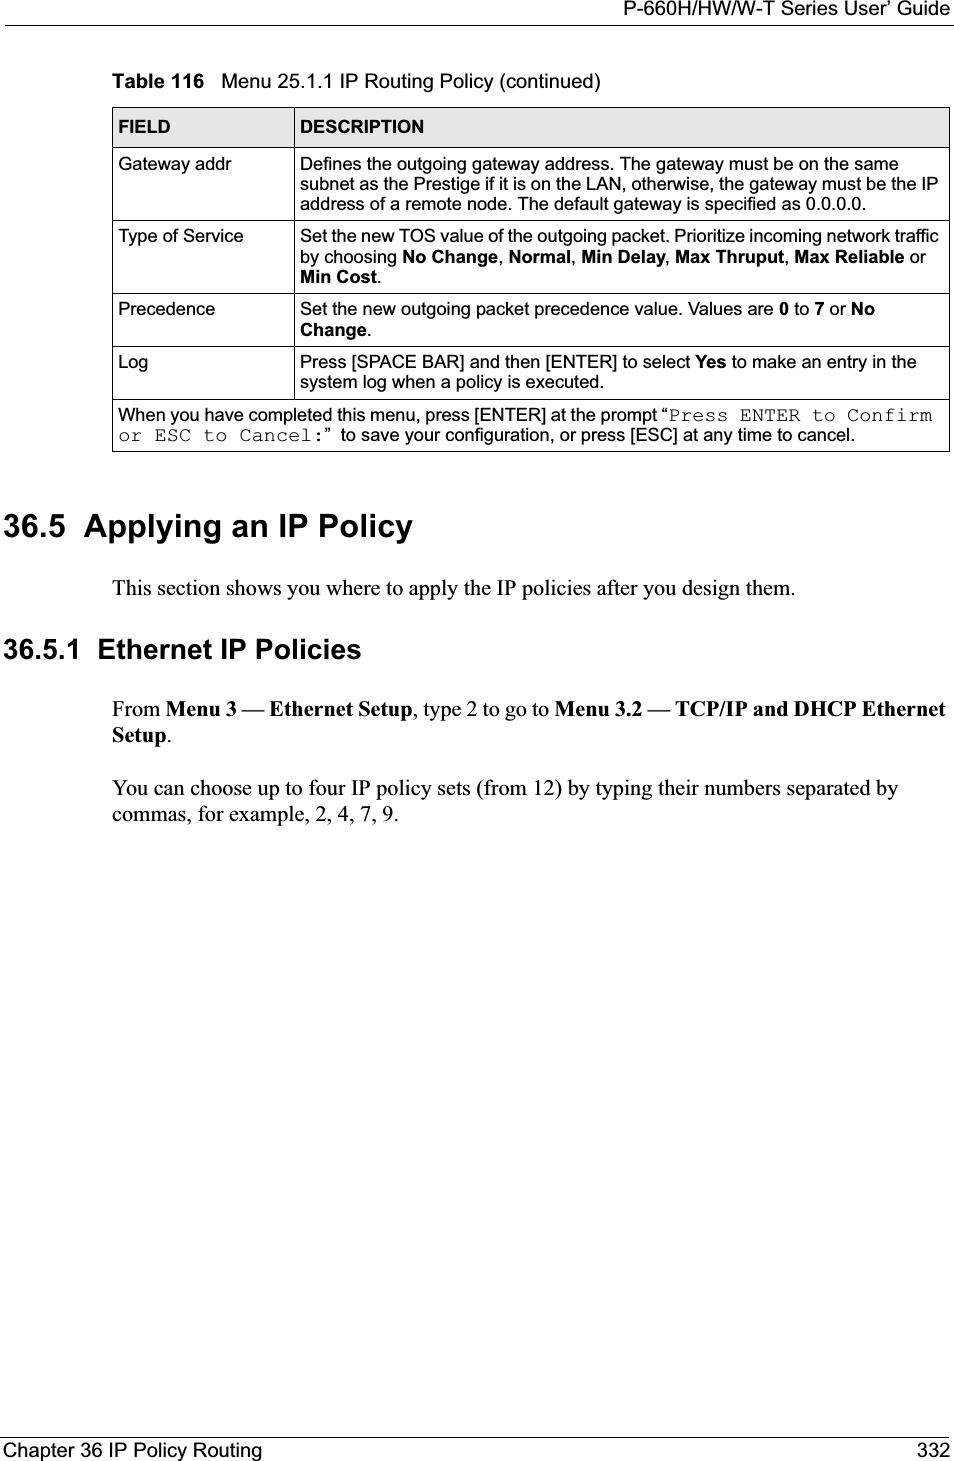 P-660H/HW/W-T Series User’ GuideChapter 36 IP Policy Routing 33236.5  Applying an IP PolicyThis section shows you where to apply the IP policies after you design them.36.5.1  Ethernet IP PoliciesFrom Menu 3 — Ethernet Setup, type 2 to go to Menu 3.2 — TCP/IP and DHCP Ethernet Setup.You can choose up to four IP policy sets (from 12) by typing their numbers separated by commas, for example, 2, 4, 7, 9.Gateway addr Defines the outgoing gateway address. The gateway must be on the same subnet as the Prestige if it is on the LAN, otherwise, the gateway must be the IP address of a remote node. The default gateway is specified as 0.0.0.0.Type of Service Set the new TOS value of the outgoing packet. Prioritize incoming network traffic by choosing No Change,Normal,Min Delay,Max Thruput, Max Reliable or Min Cost.Precedence Set the new outgoing packet precedence value. Values are 0 to 7 or NoChange.Log Press [SPACE BAR] and then [ENTER] to select Yes to make an entry in the system log when a policy is executed.When you have completed this menu, press [ENTER] at the prompt “Press ENTER to Confirm or ESC to Cancel:”  to save your configuration, or press [ESC] at any time to cancel.Table 116   Menu 25.1.1 IP Routing Policy (continued)FIELD DESCRIPTION